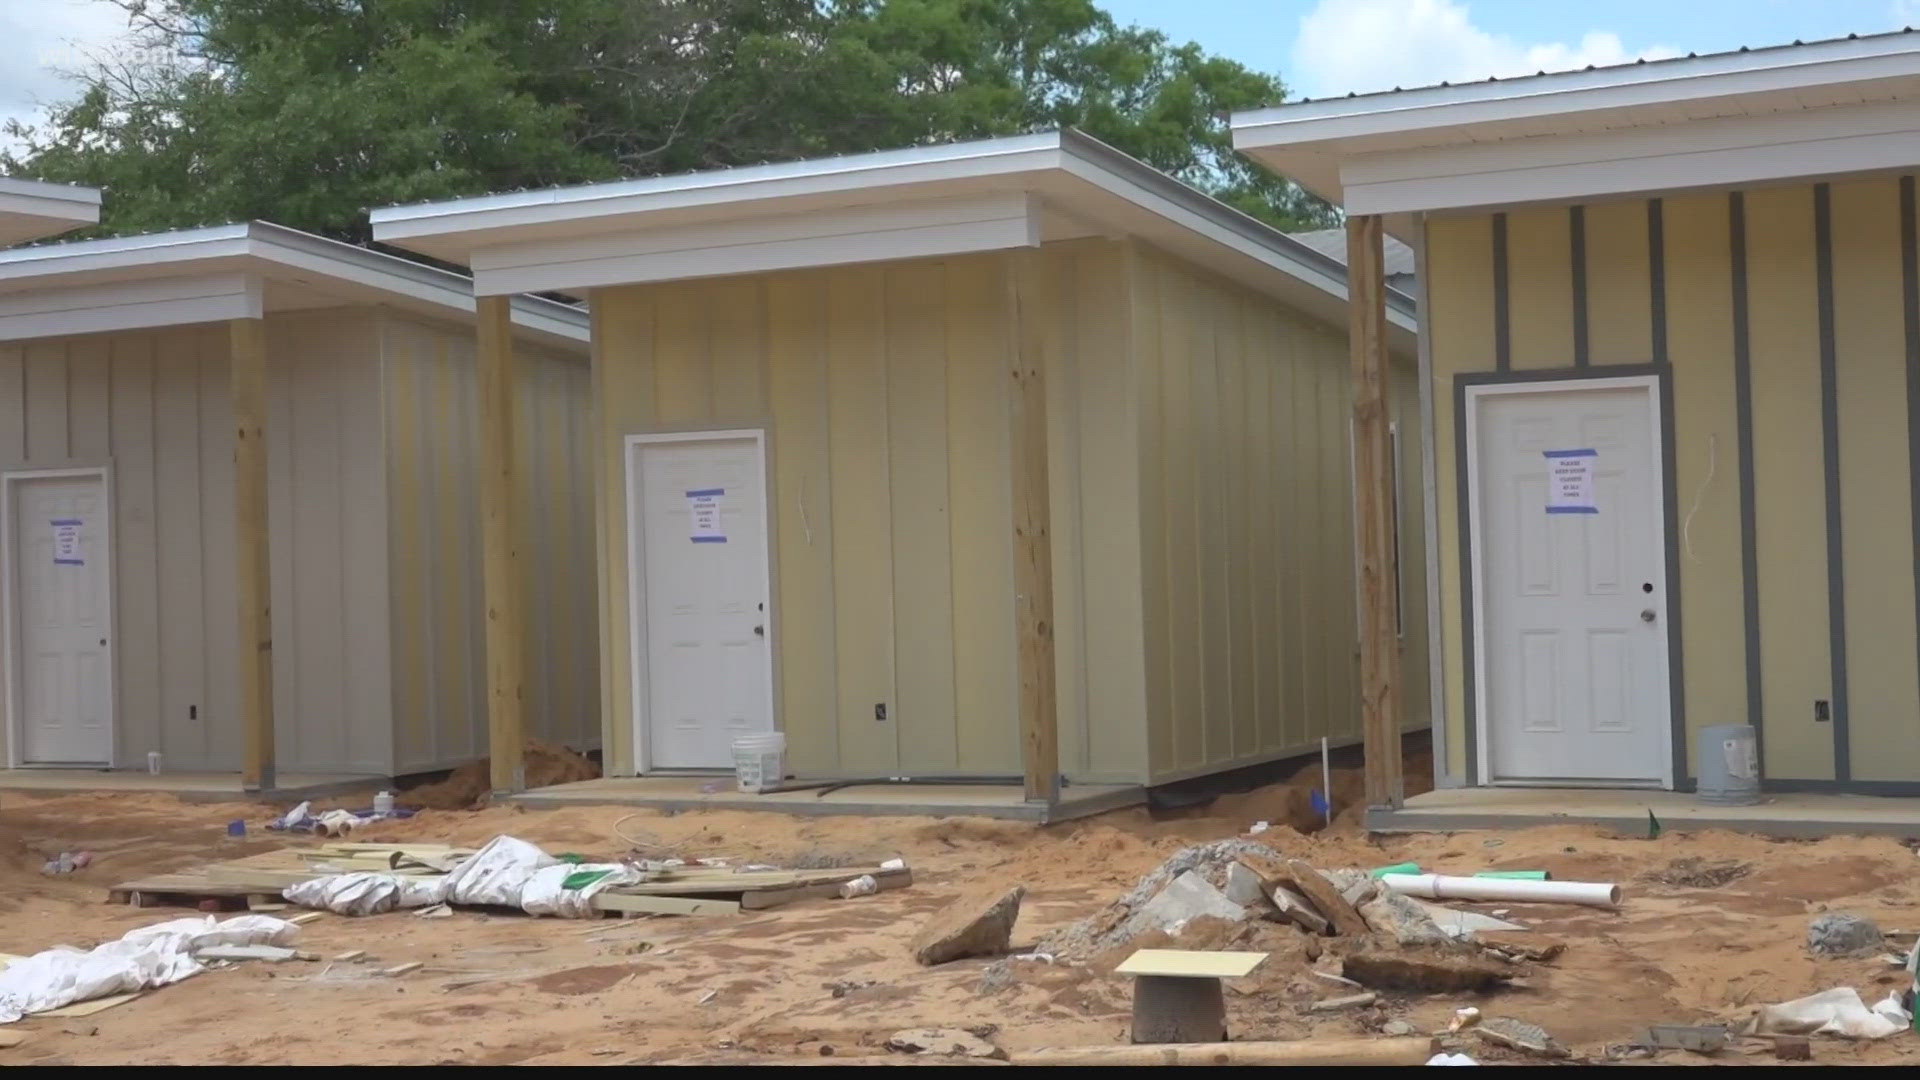 Five small buildings will serve as transitional housing for people who need it.  It's a resource that Sumter residents say is needed here in the community.